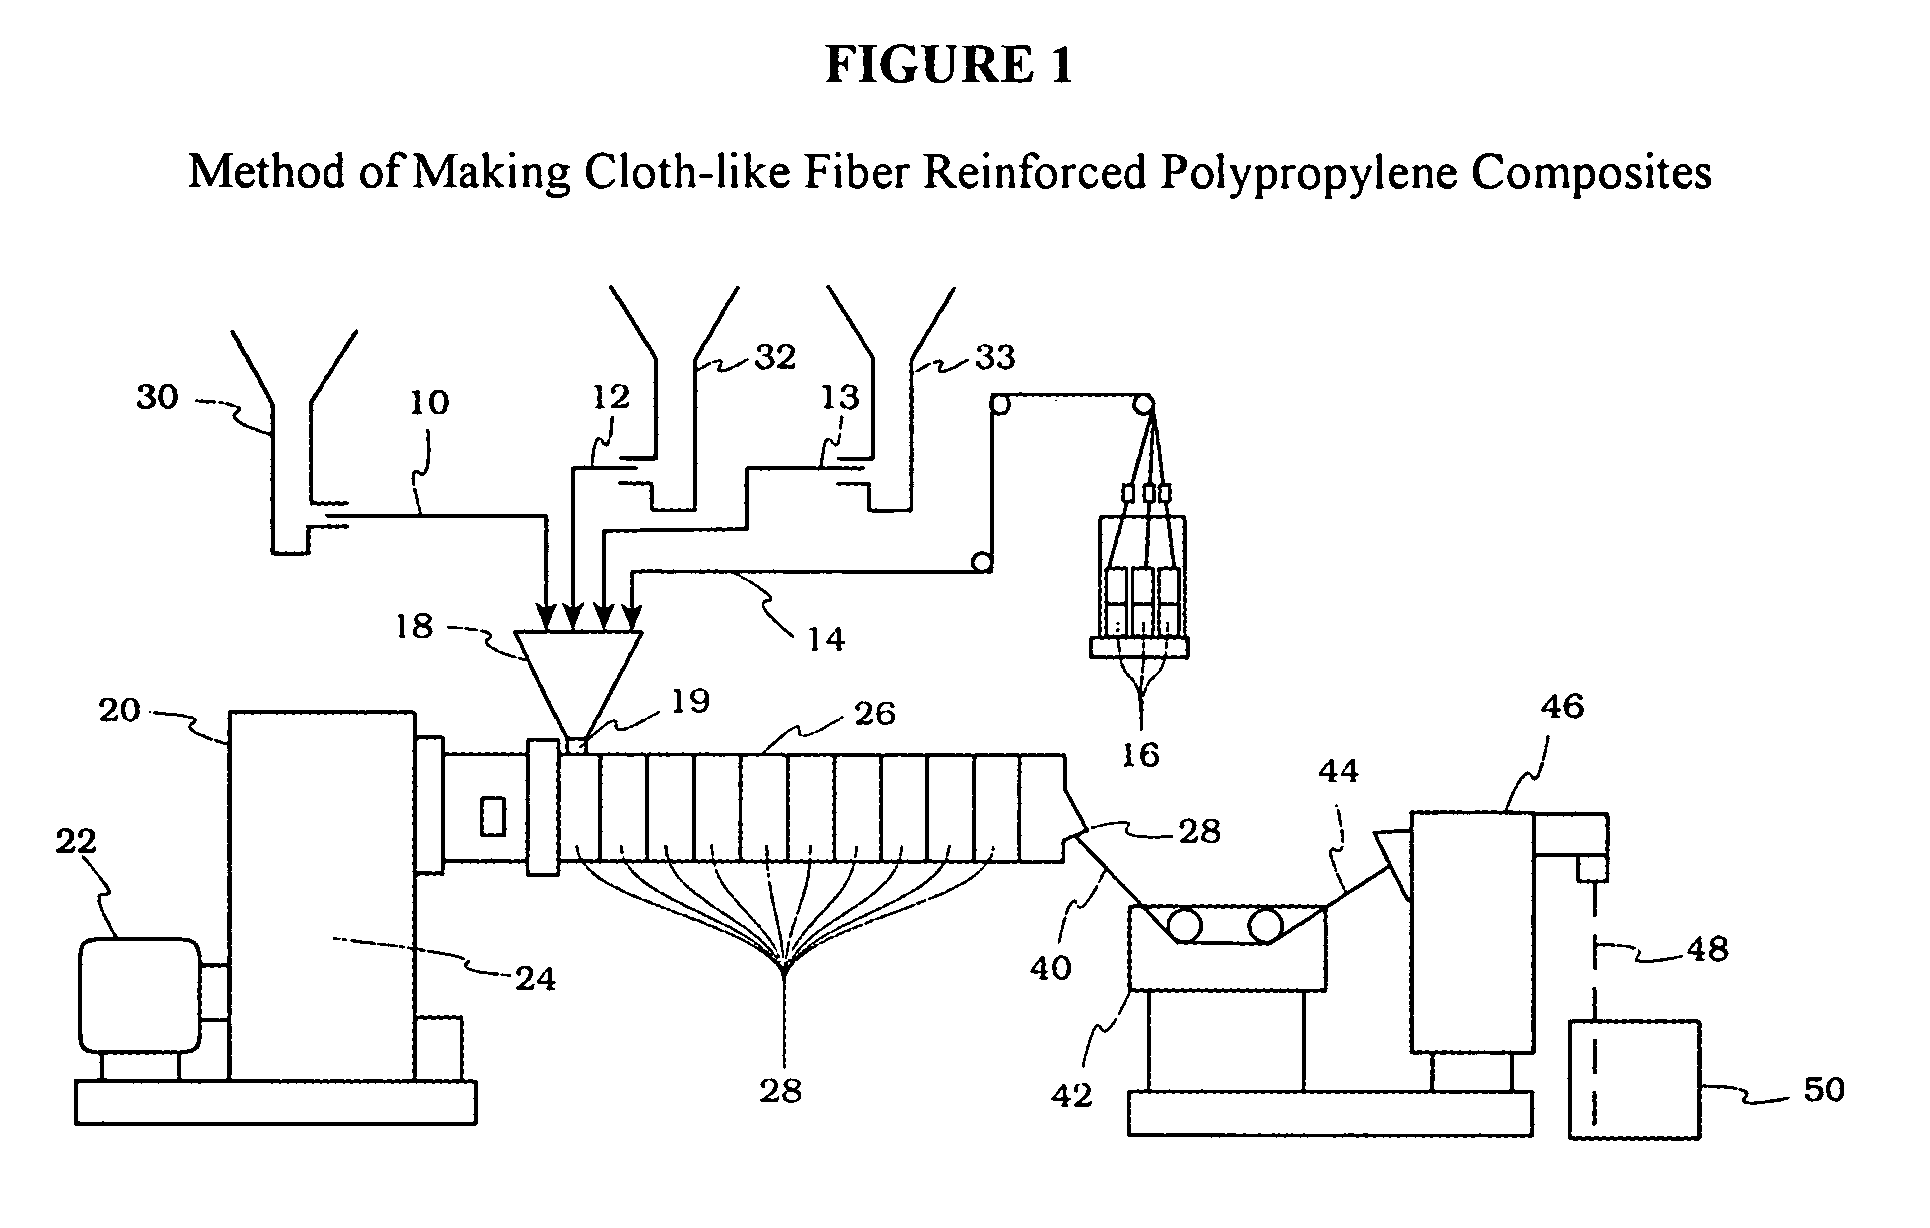 Cloth-like fiber reinforced polypropylene compositions and method of making thereof